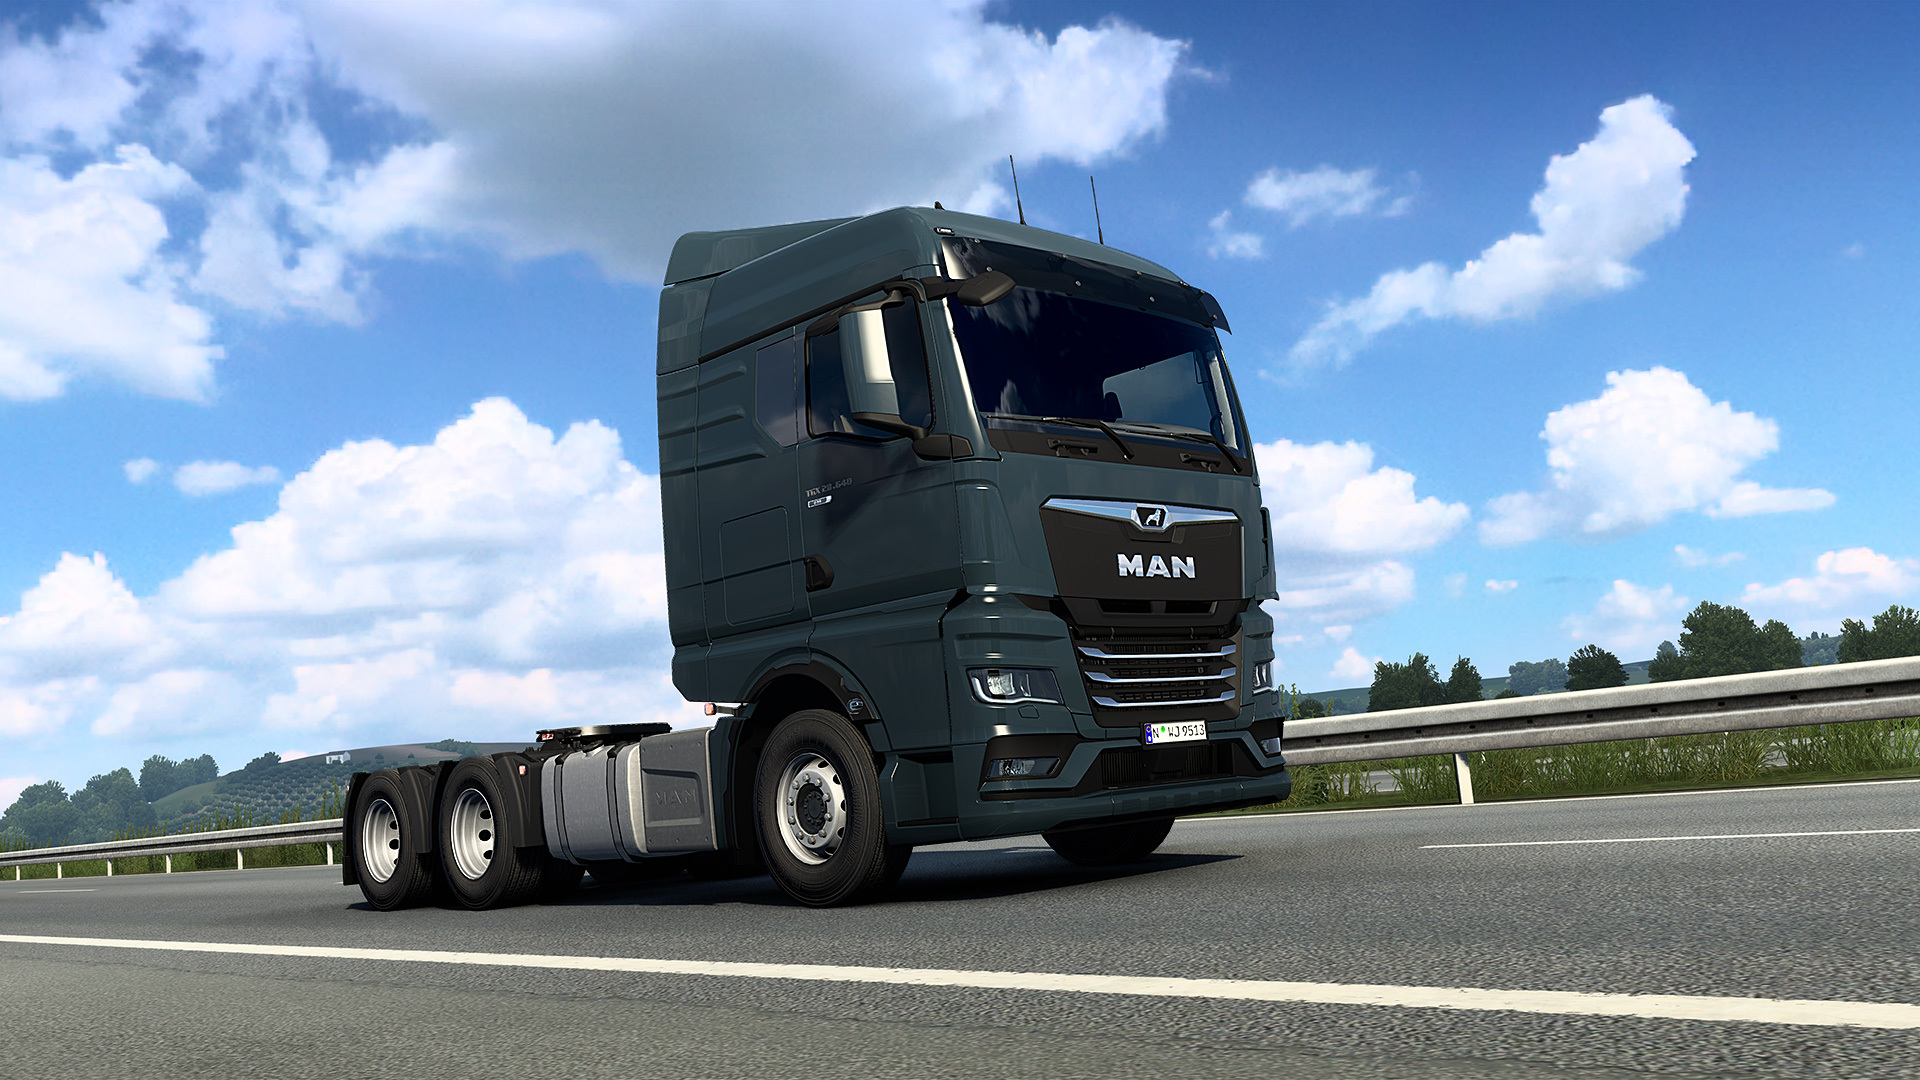 SCS Software's blog: Euro Truck Simulator 2: 1.47 Ownable Livestock Trailers